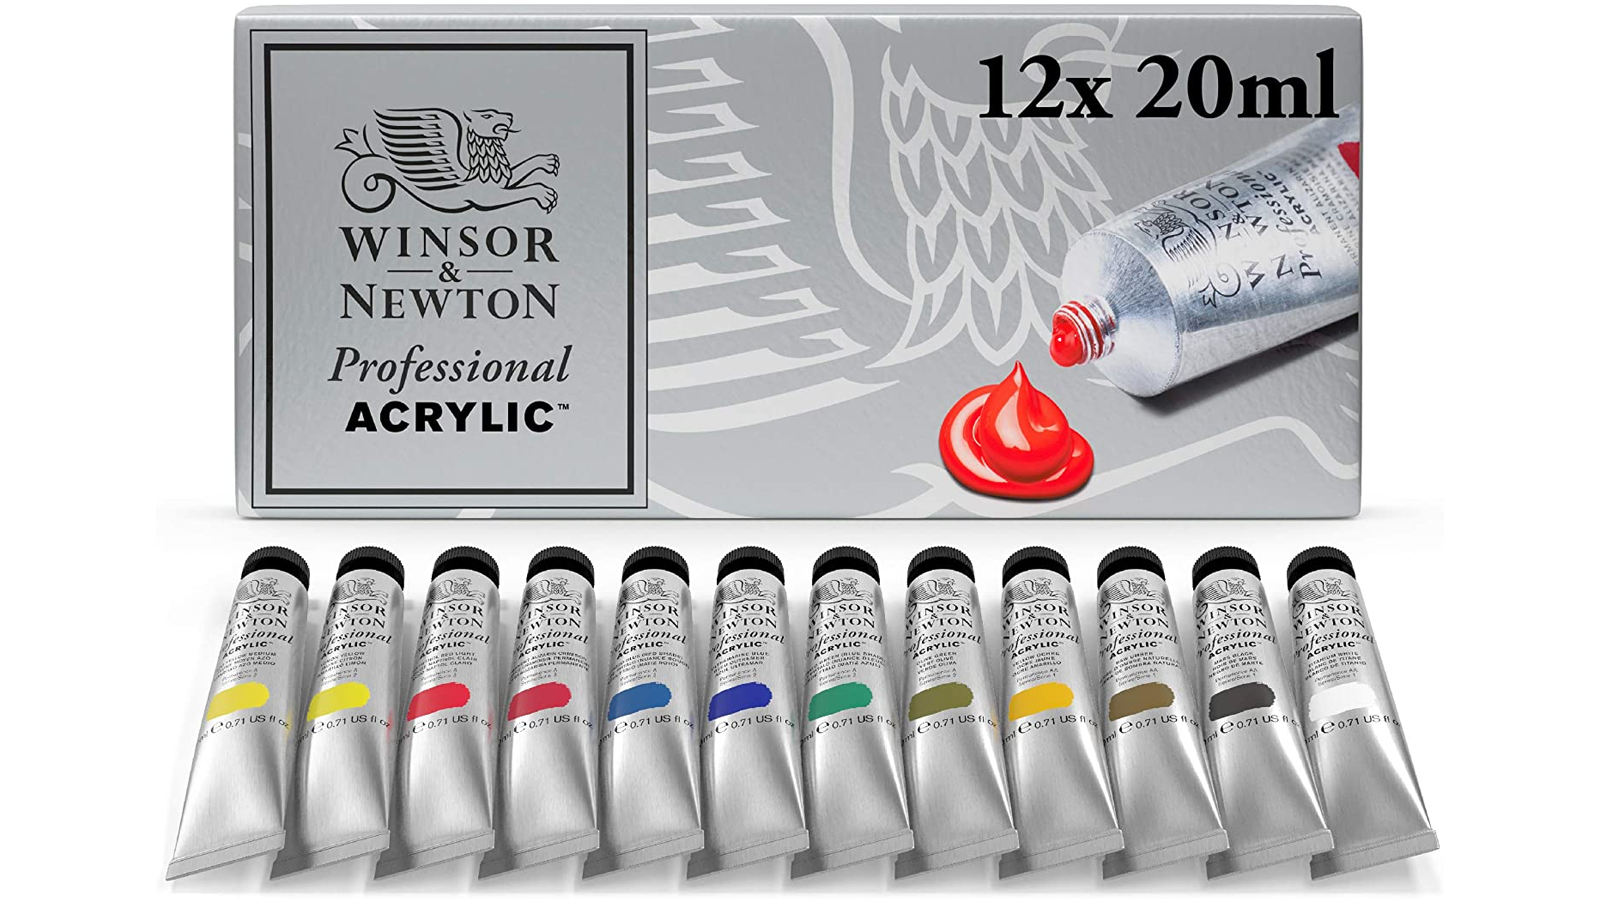 A set of Winsor and Newton Professional acrylic paints